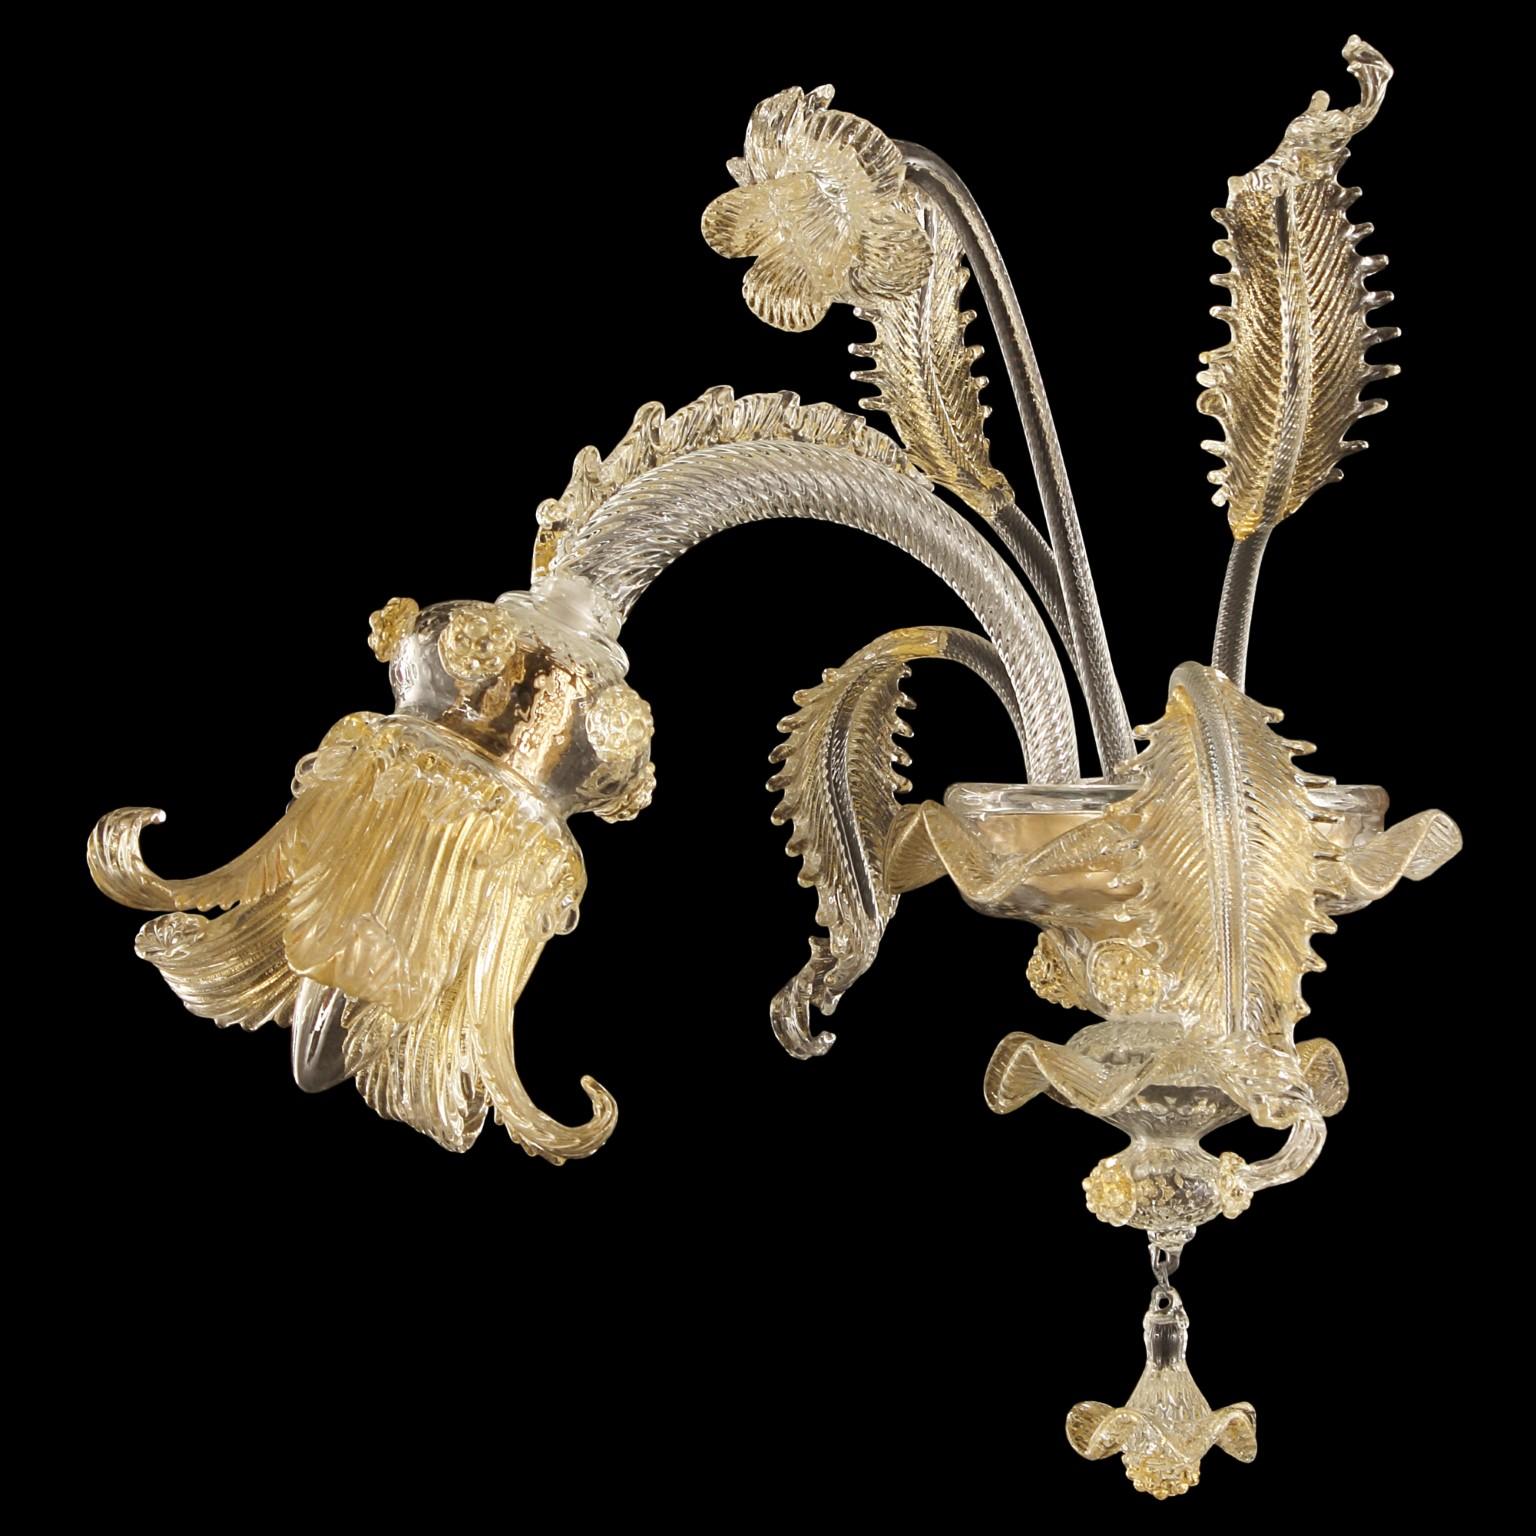 Luxury sconce 1 arm crystal and gold Murano glass Golden Century86 by Multiforme
The collection of artistic glass chandeliers Golden Century 086 is a tribute to the golden and luxurious Venice of the XVIIIth. The design of this collection recalls